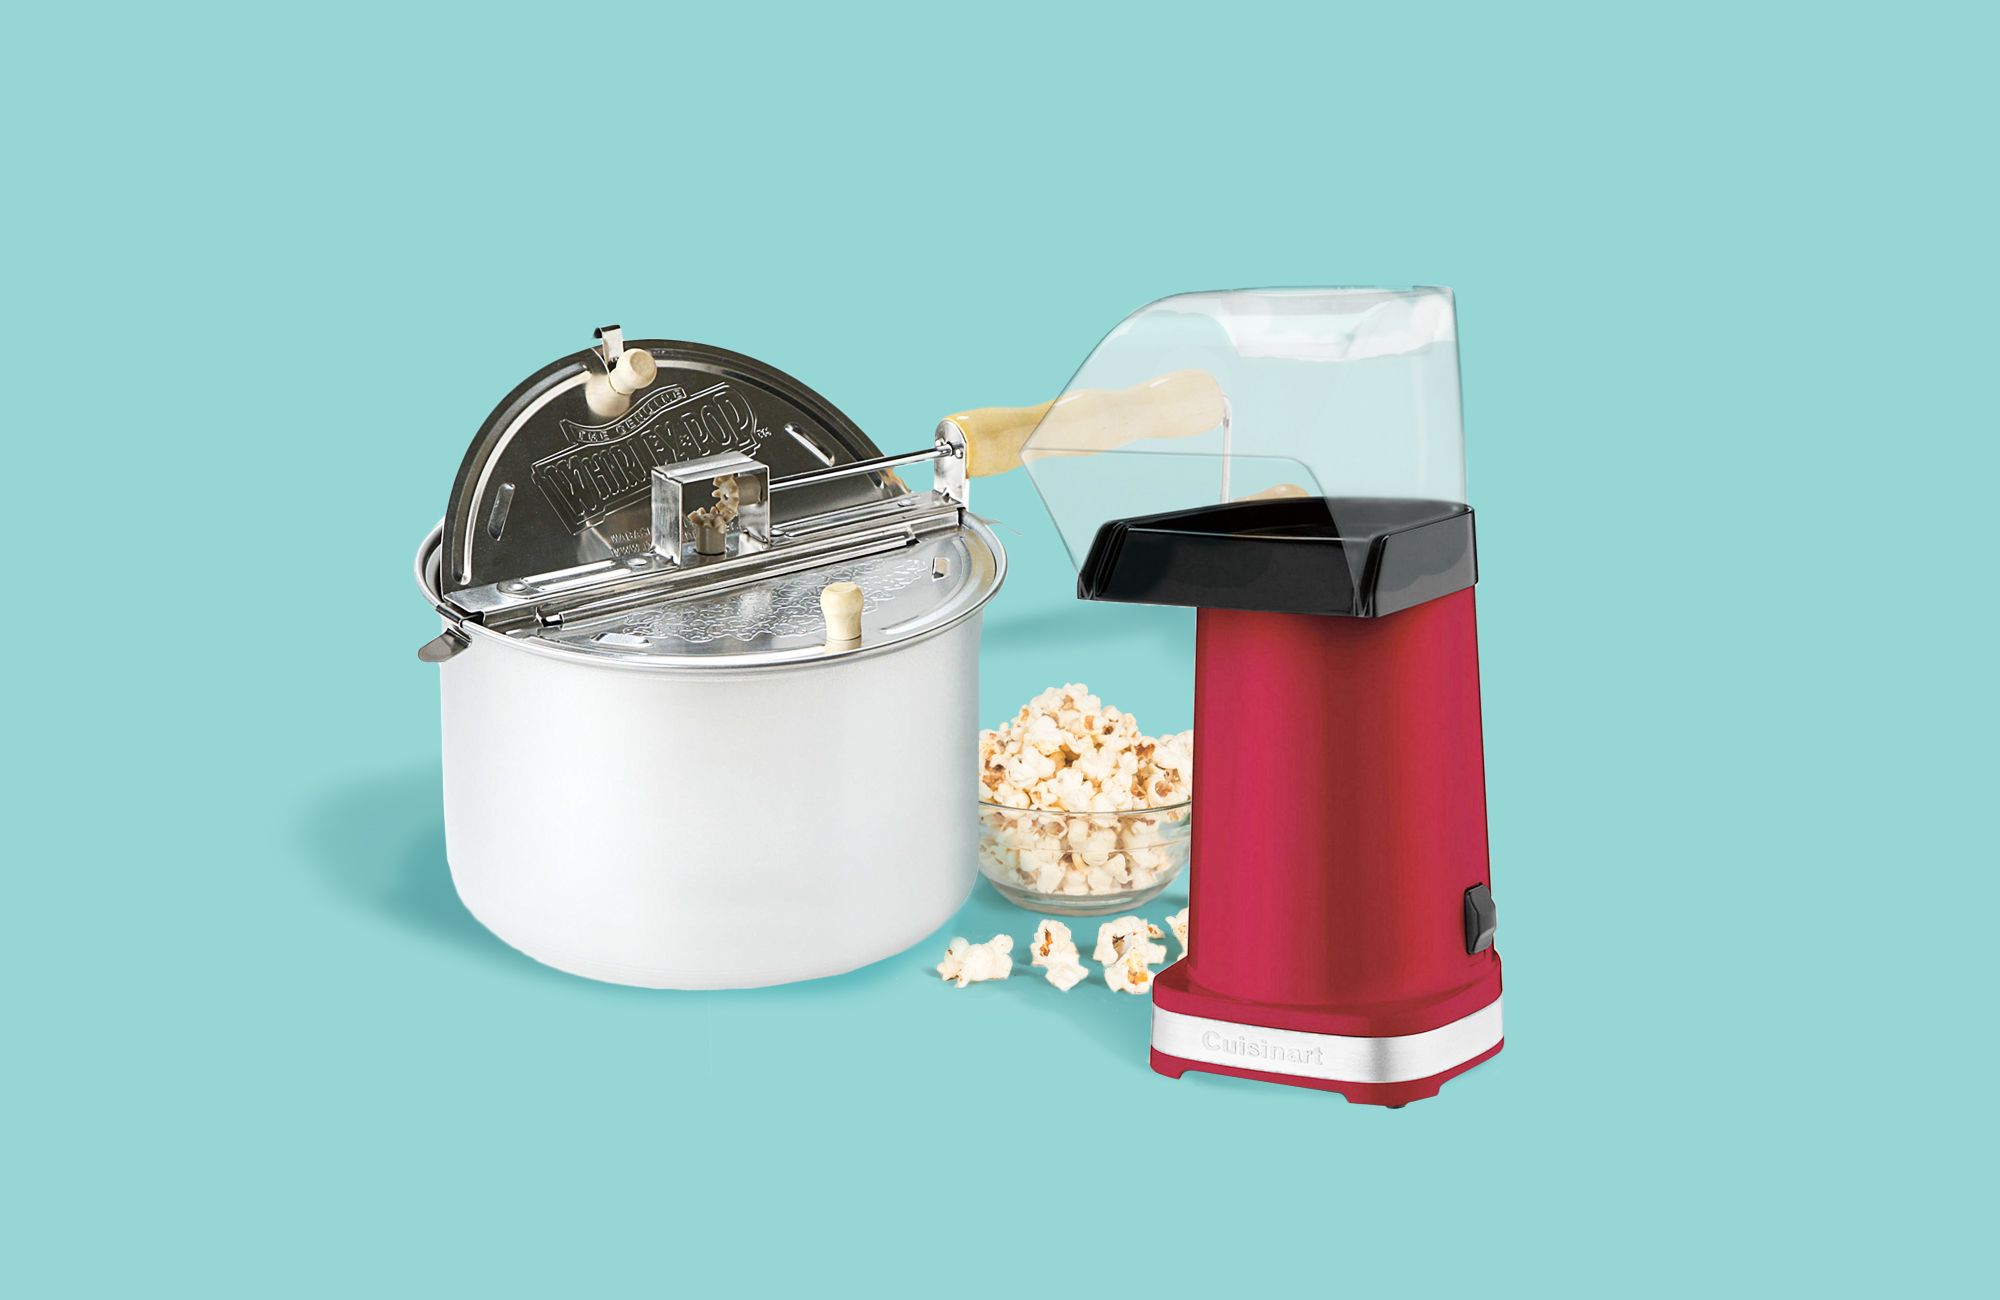 Upgraded Oil-free Pop Corn Popper CareUAll Hot Air Popcorn Maker 1400W Max Hot Air Popper Popcorn Machine with Removable Lid and Measuring Spoon Gloss White Making Low Fat Healthy Snacks at Home 